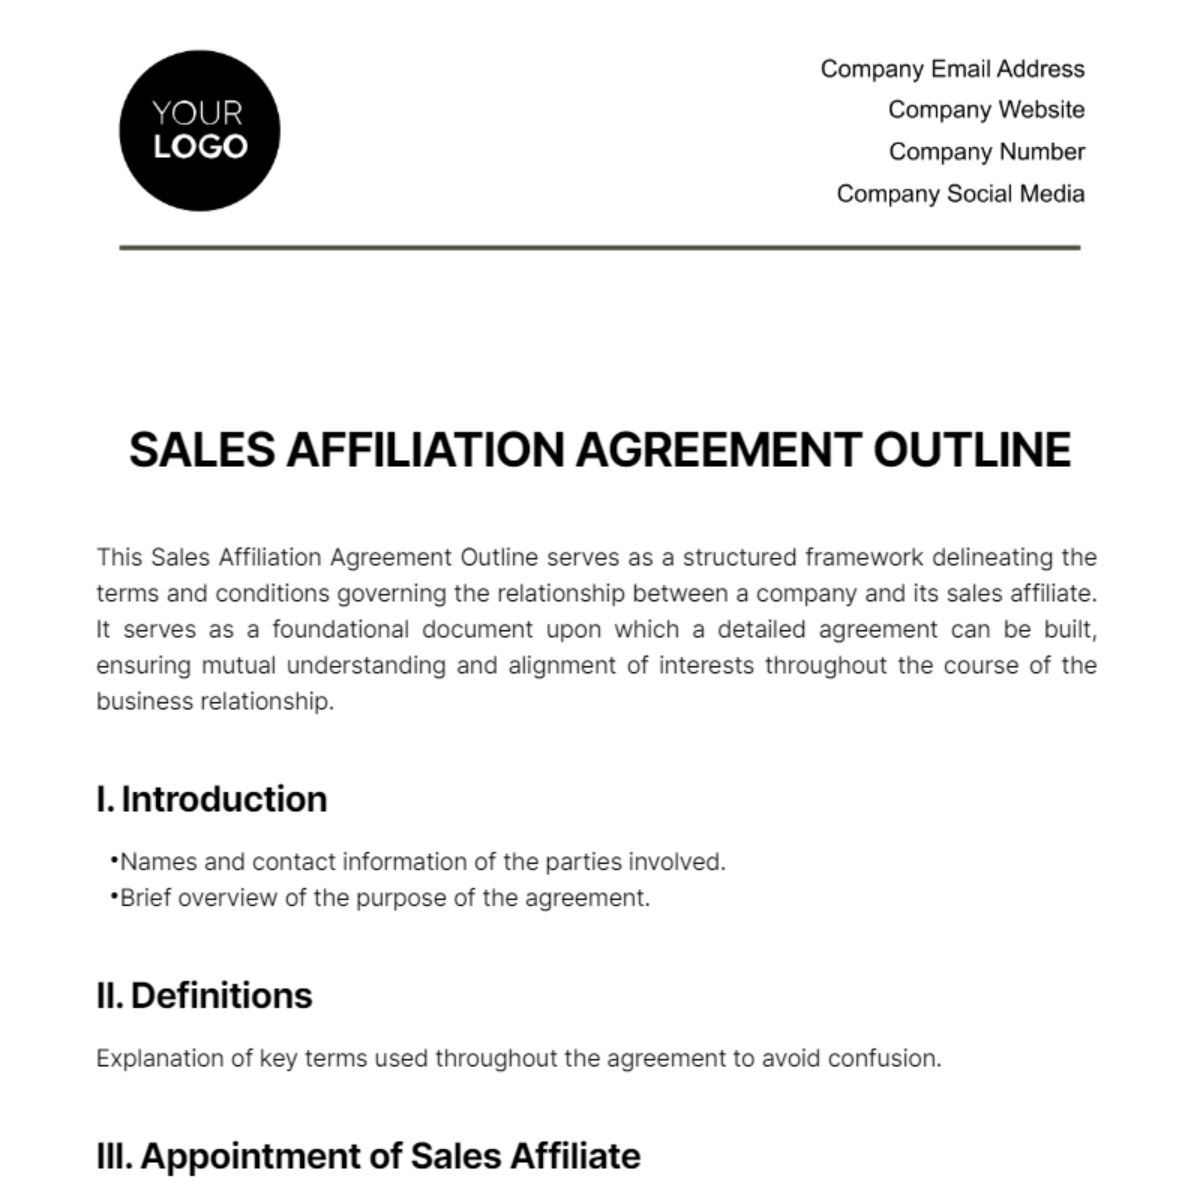 Sales Affiliation Agreement Outline Template